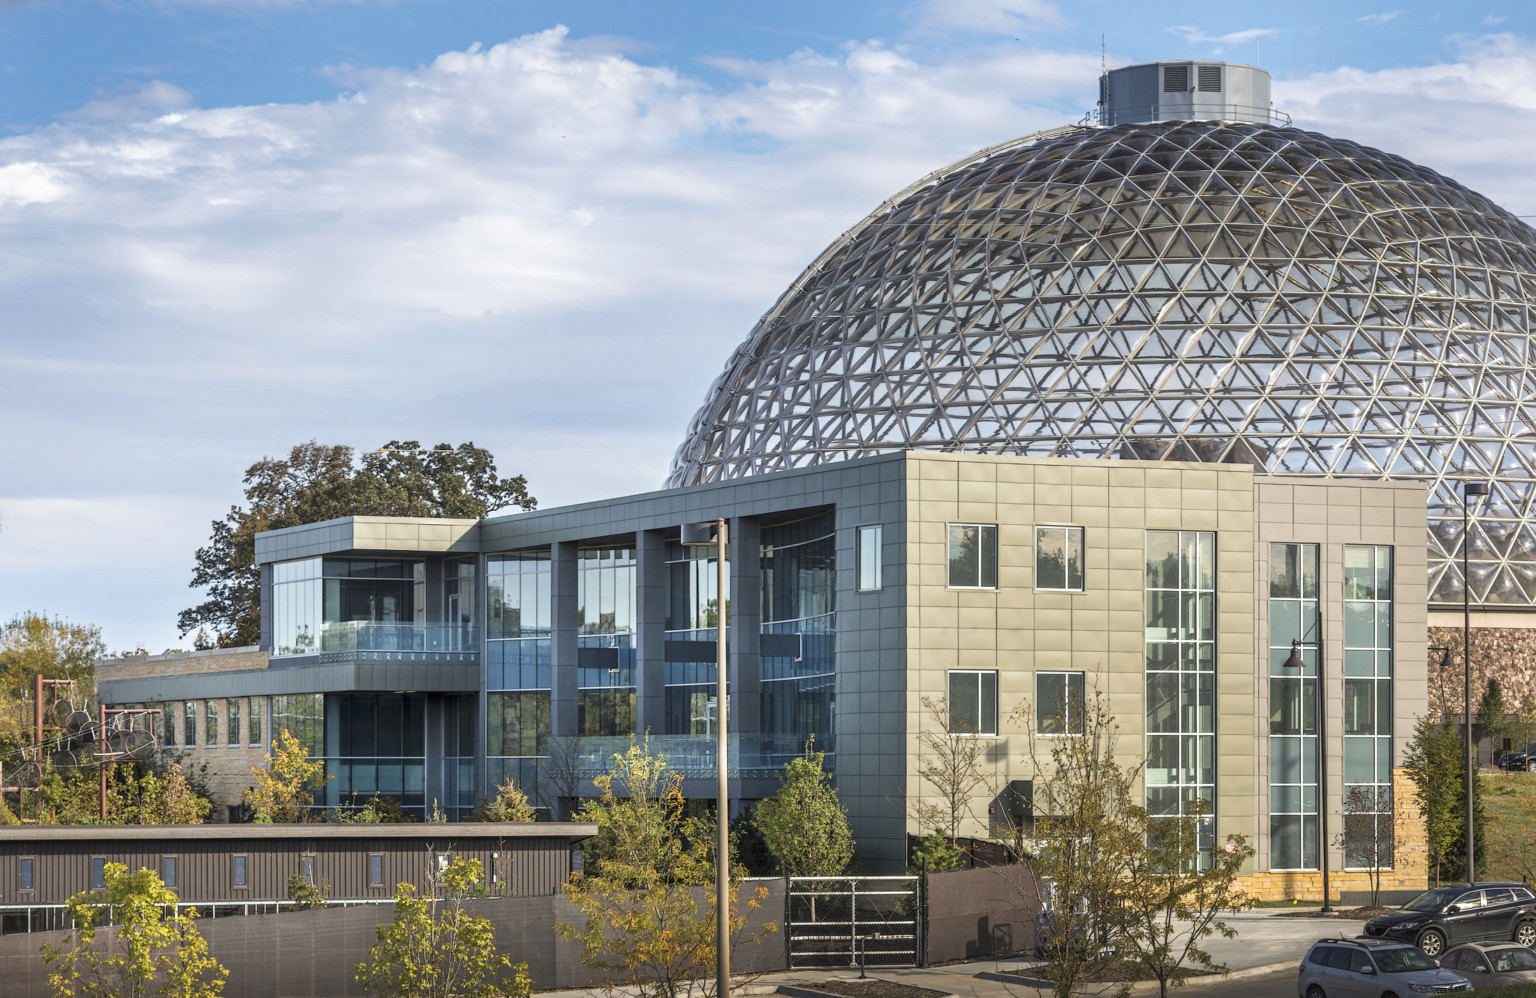 The Omaha Henry Doorly Zoo Education Building with large windows and wrapped facade in front of glass domed building